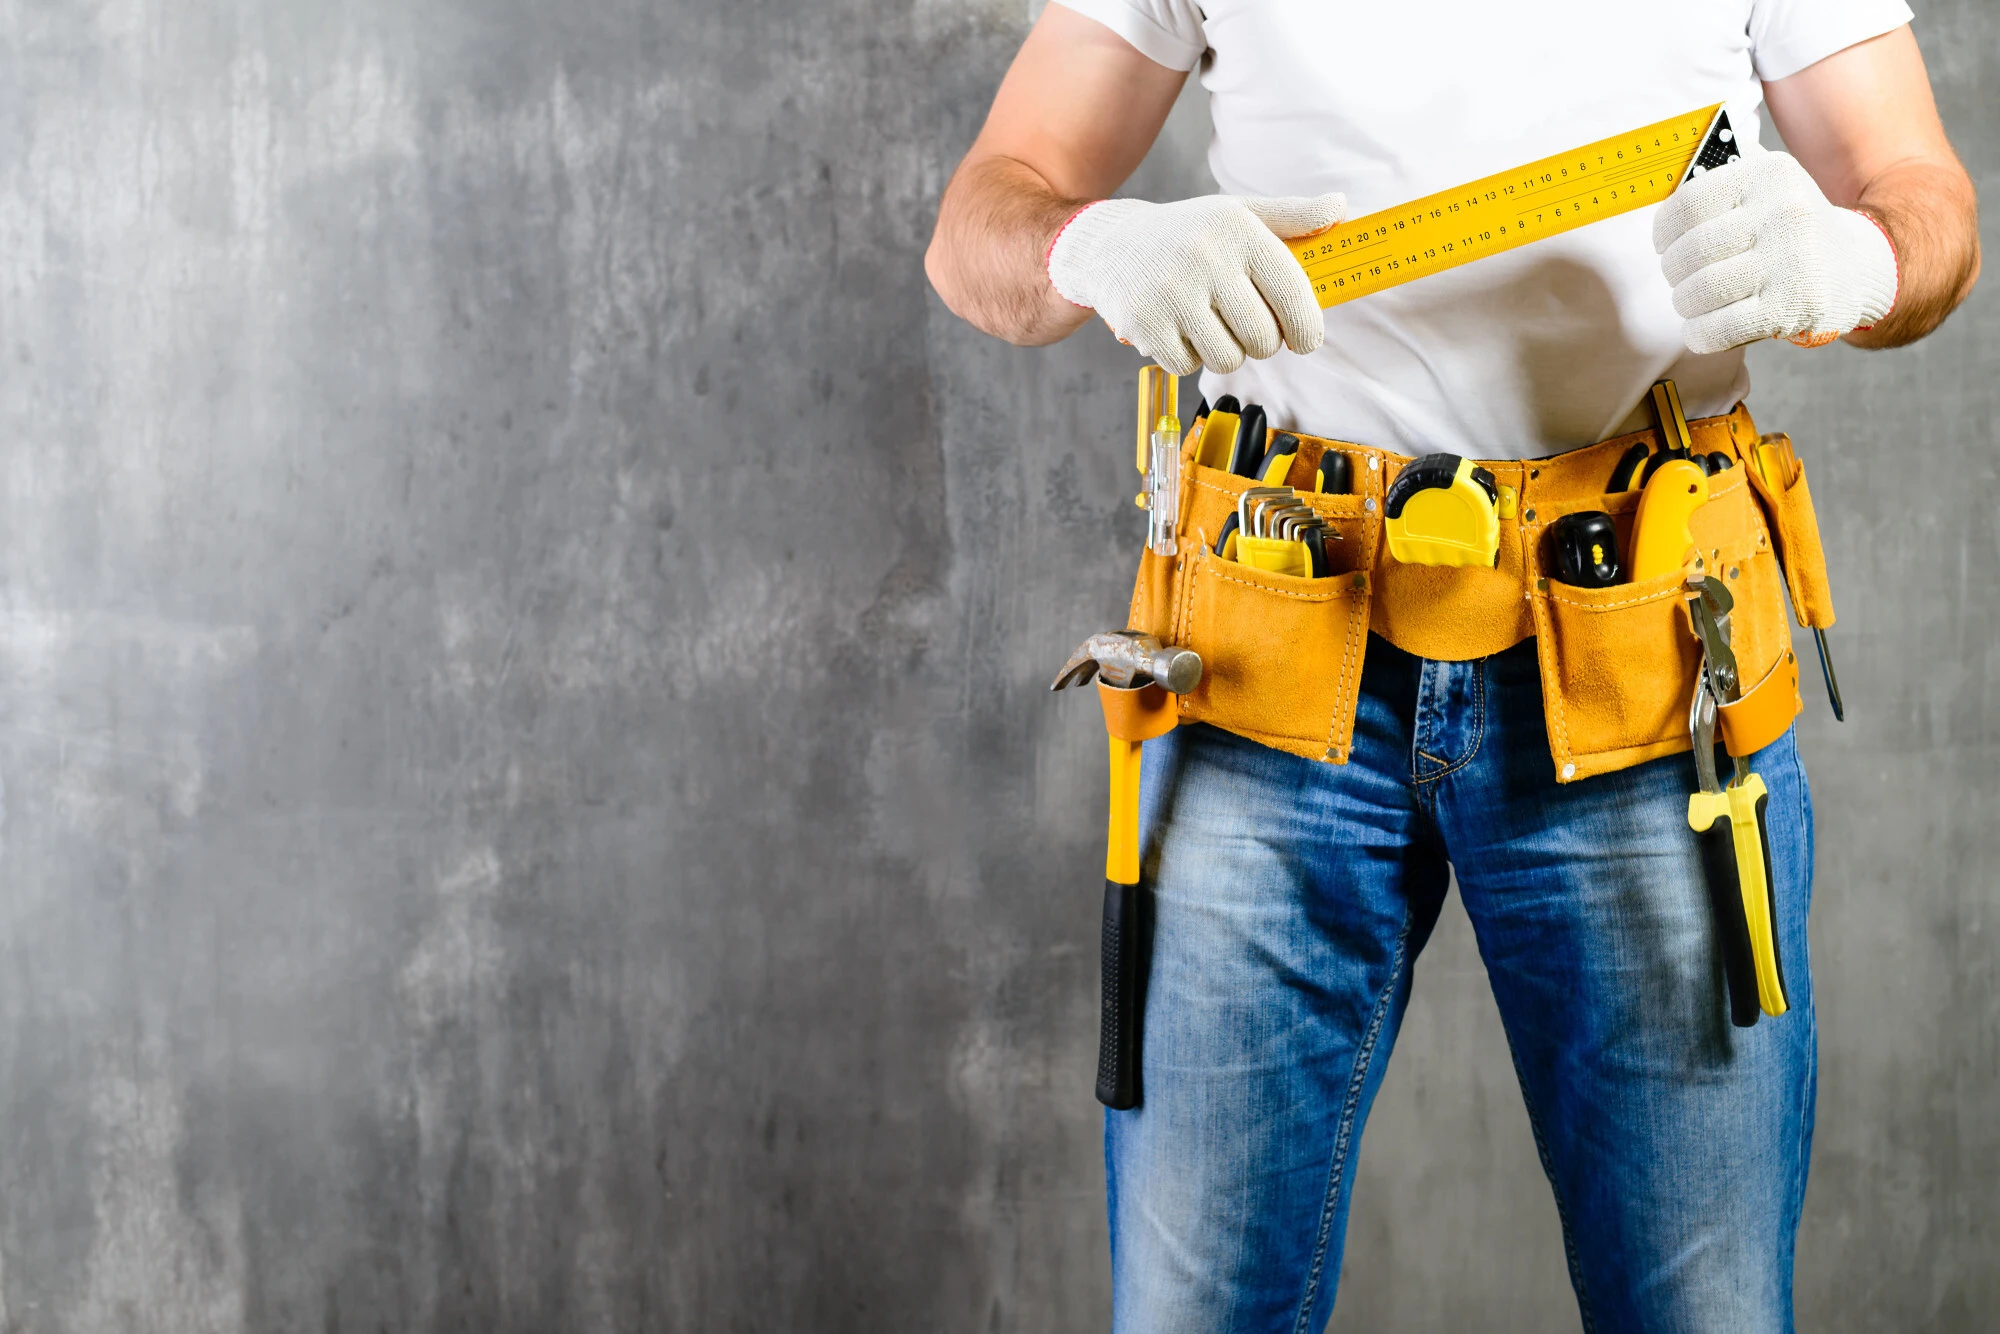 Handyman Services in London: What They Are and When to Use Them